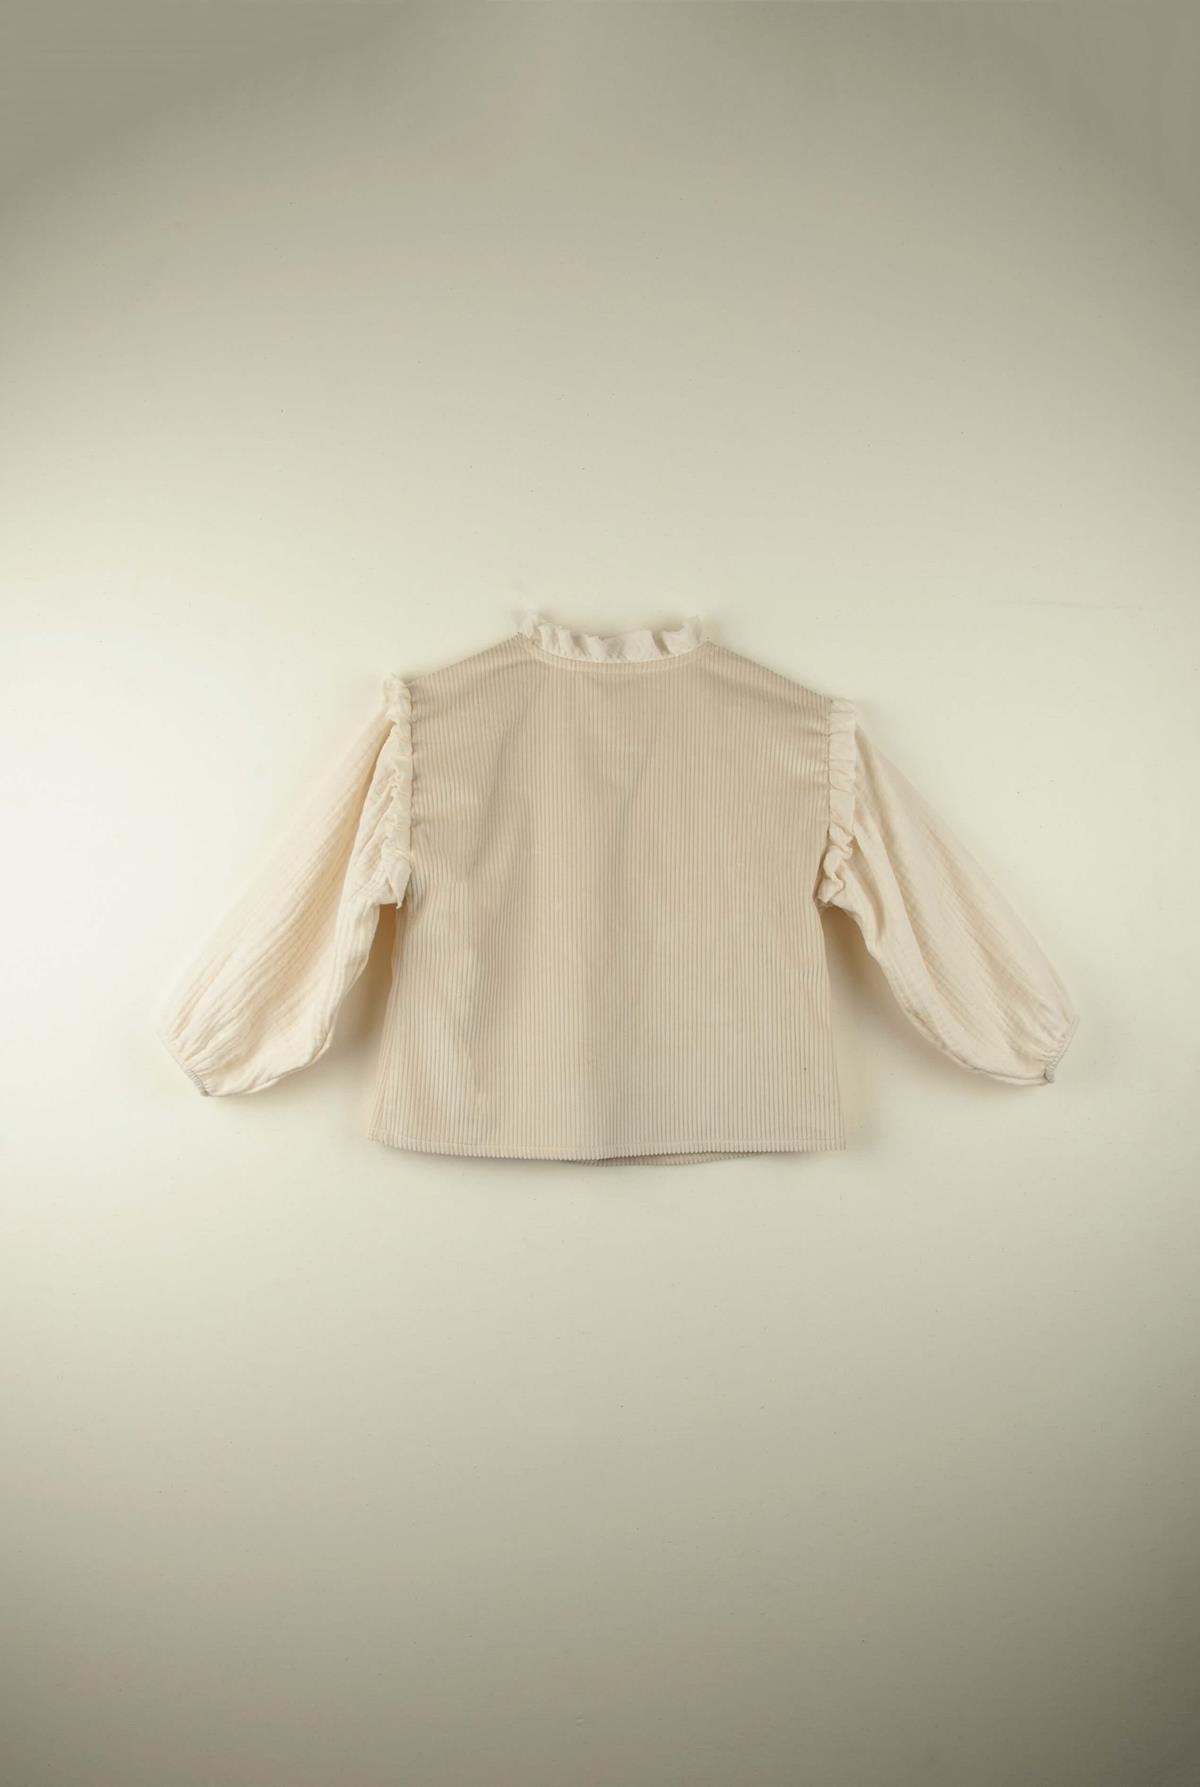 Mod.14.2 Off-white blouse with puffed sleeve | AW21.22 Mod.14.2 Off-white blouse with puffed sleeve | 1